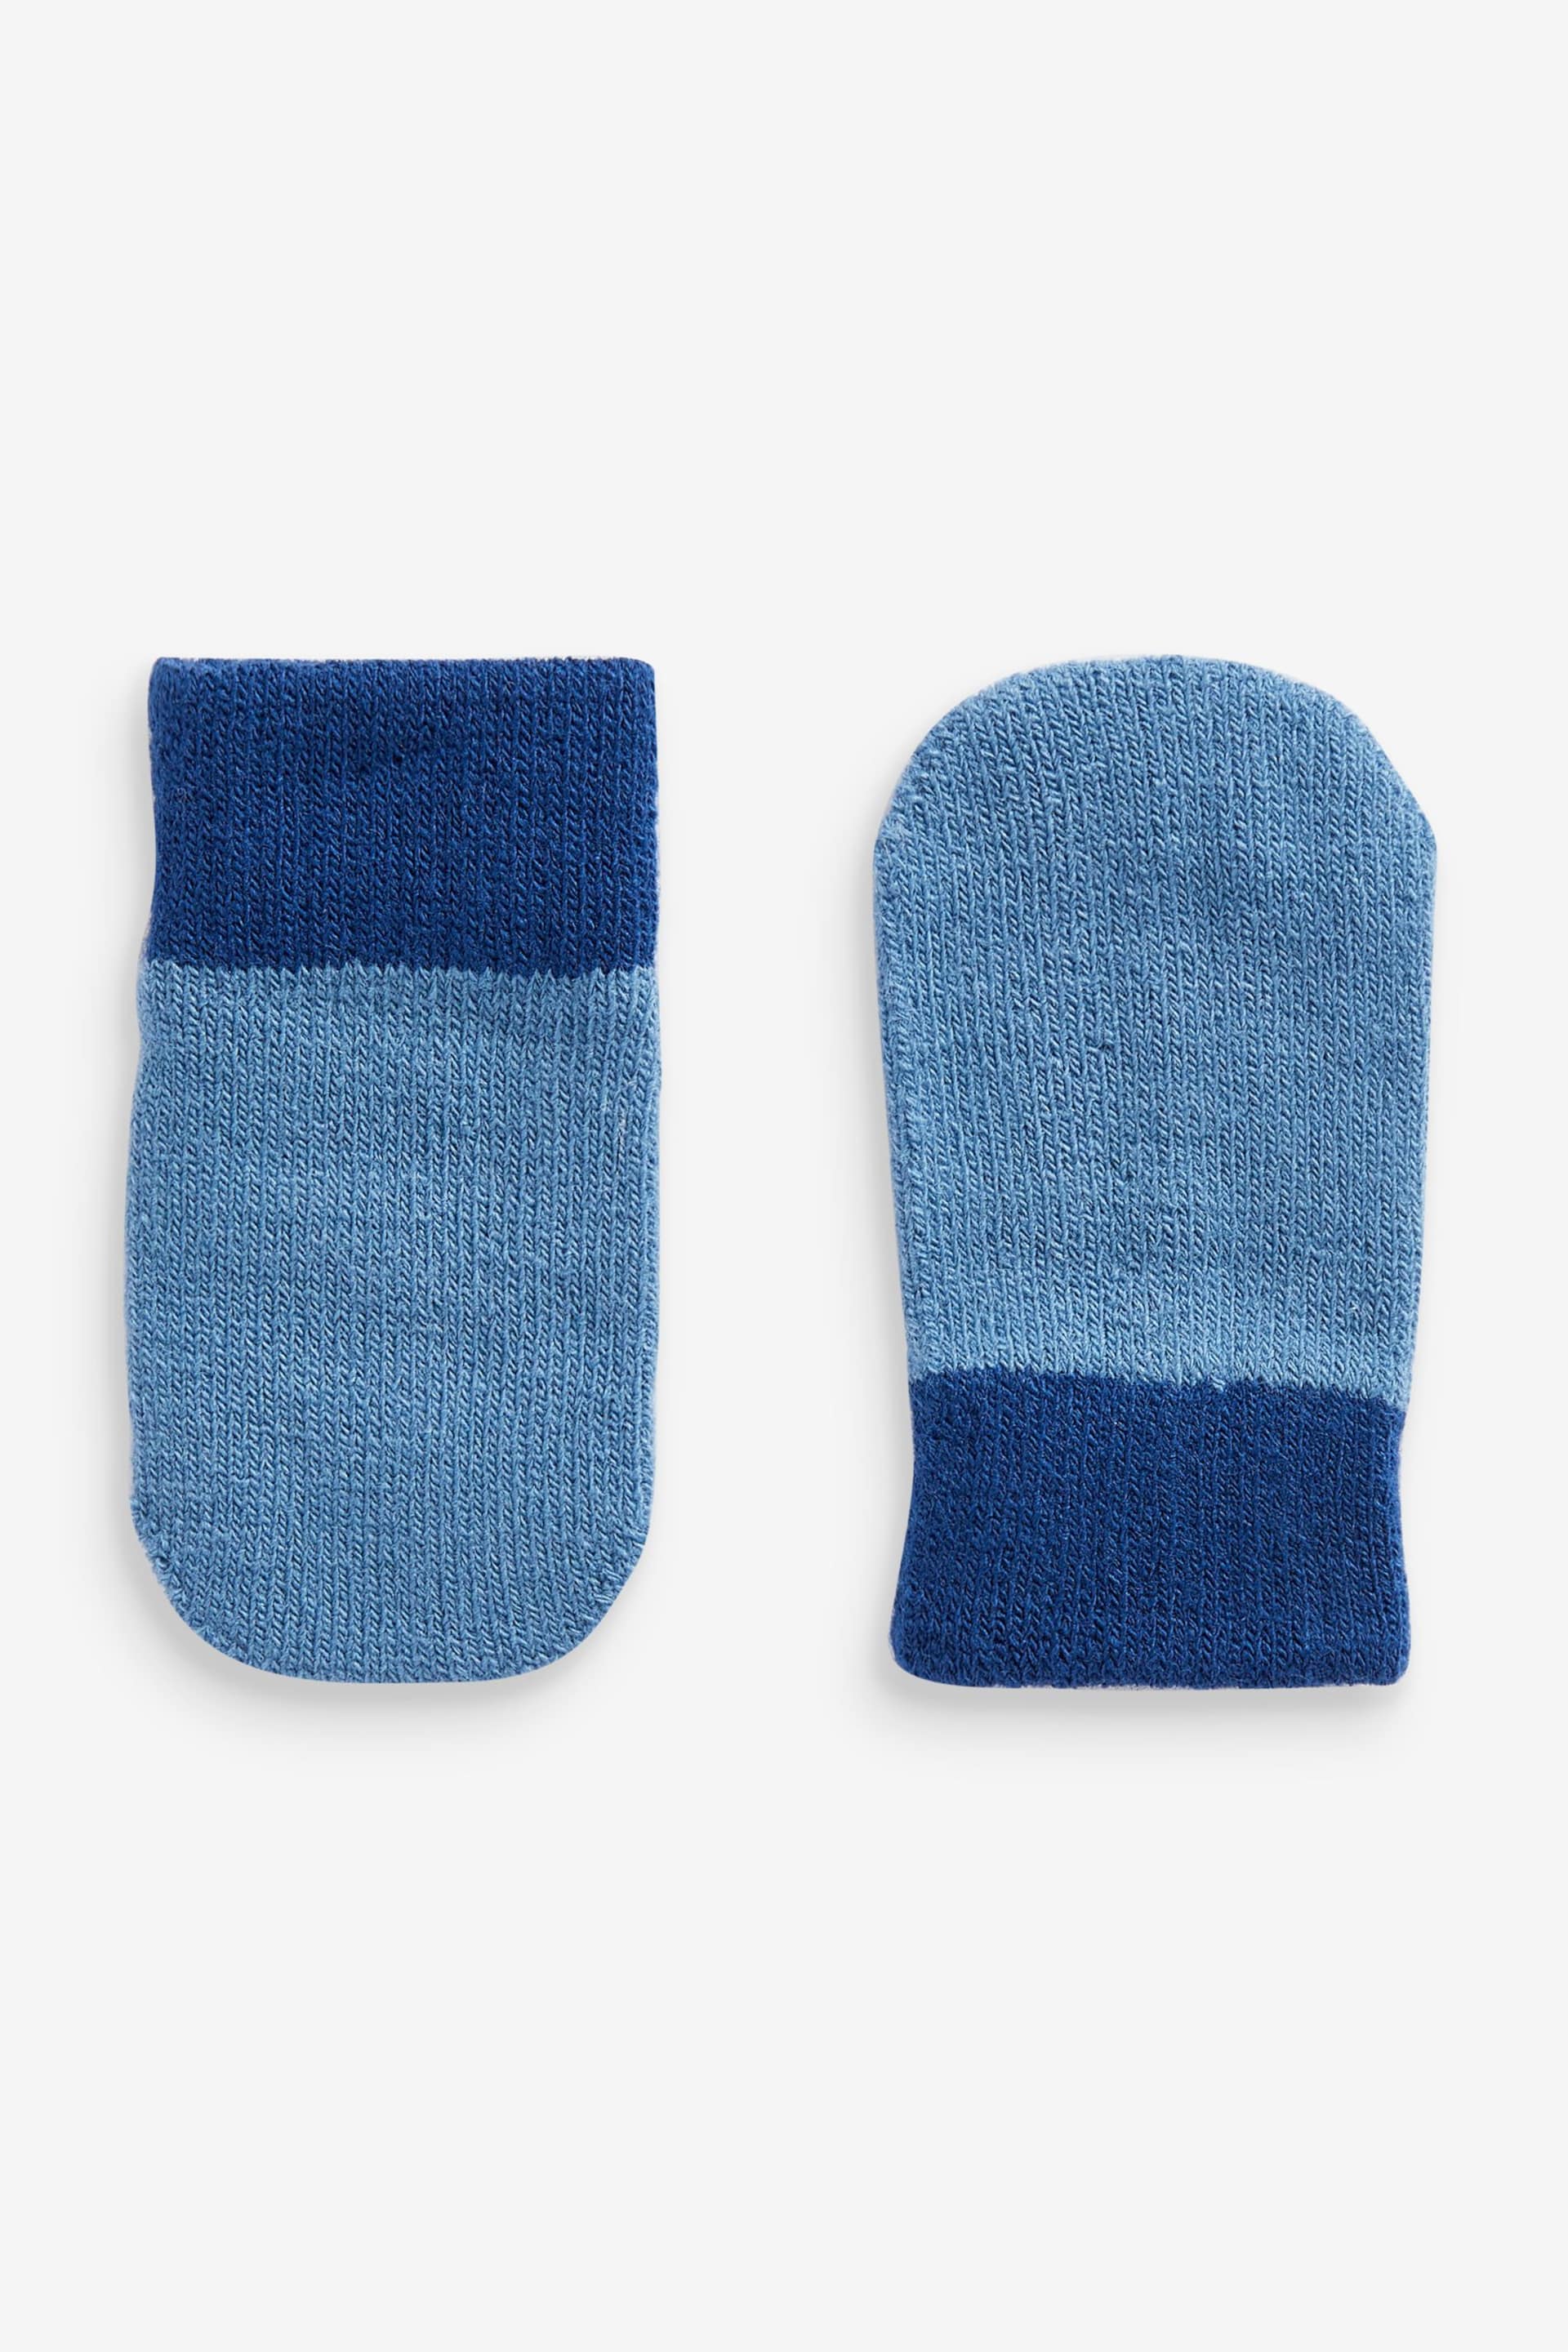 Navy/Bue/Grey Mittens 3 Pack (3mths-6yrs) - Image 3 of 4